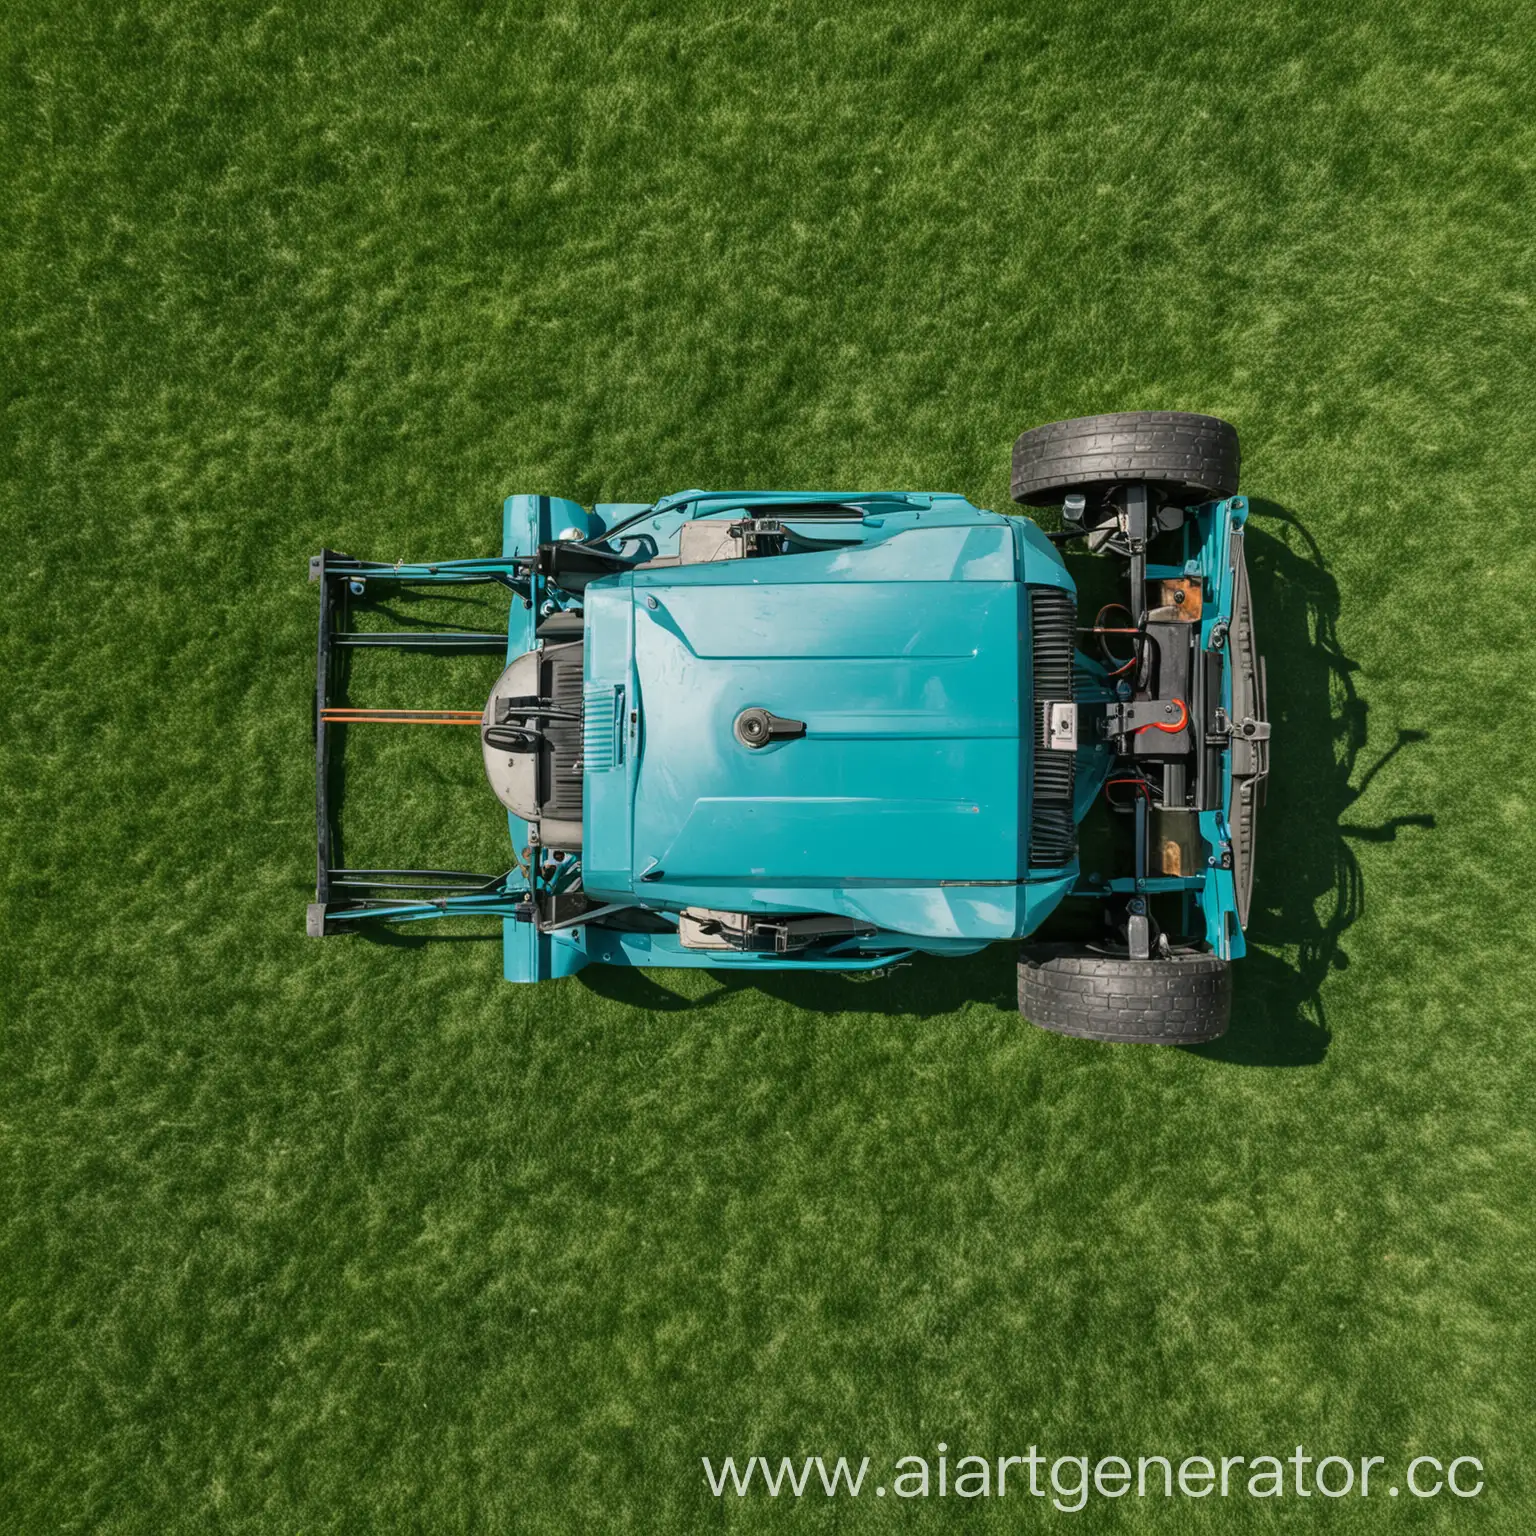 Aerial-View-of-Blue-Lawn-Mower-on-Vibrant-Green-Lawn